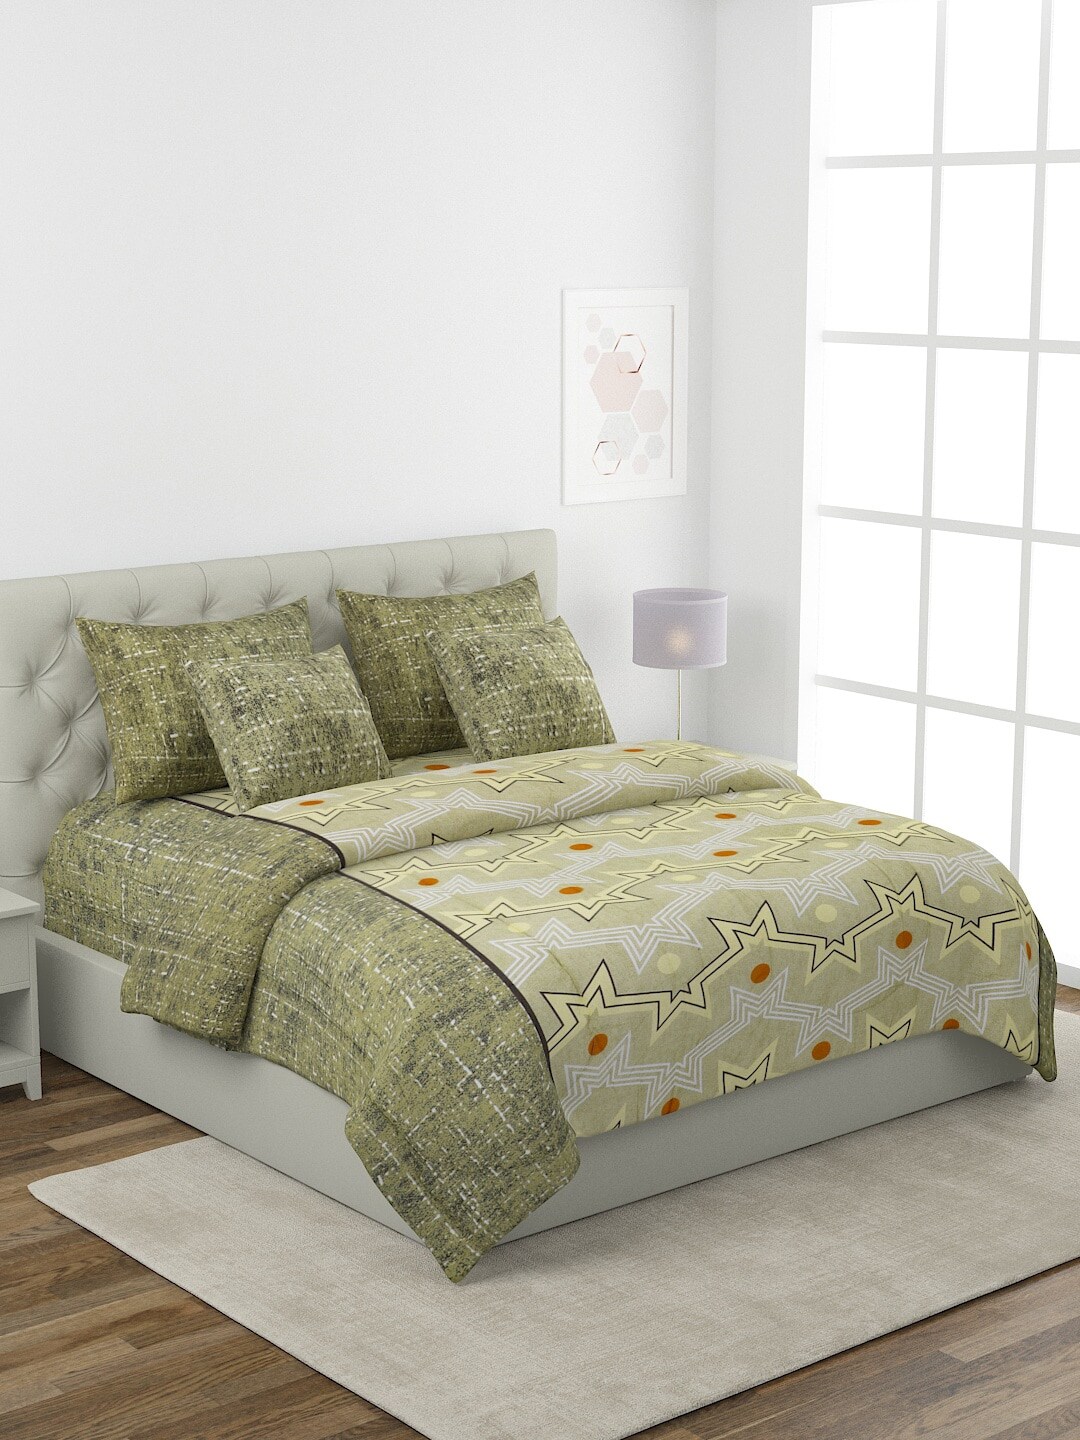 ROMEE Olive Green & Light Yellow Quirky Printed Double King Bedding Set with AC Comforter Price in India